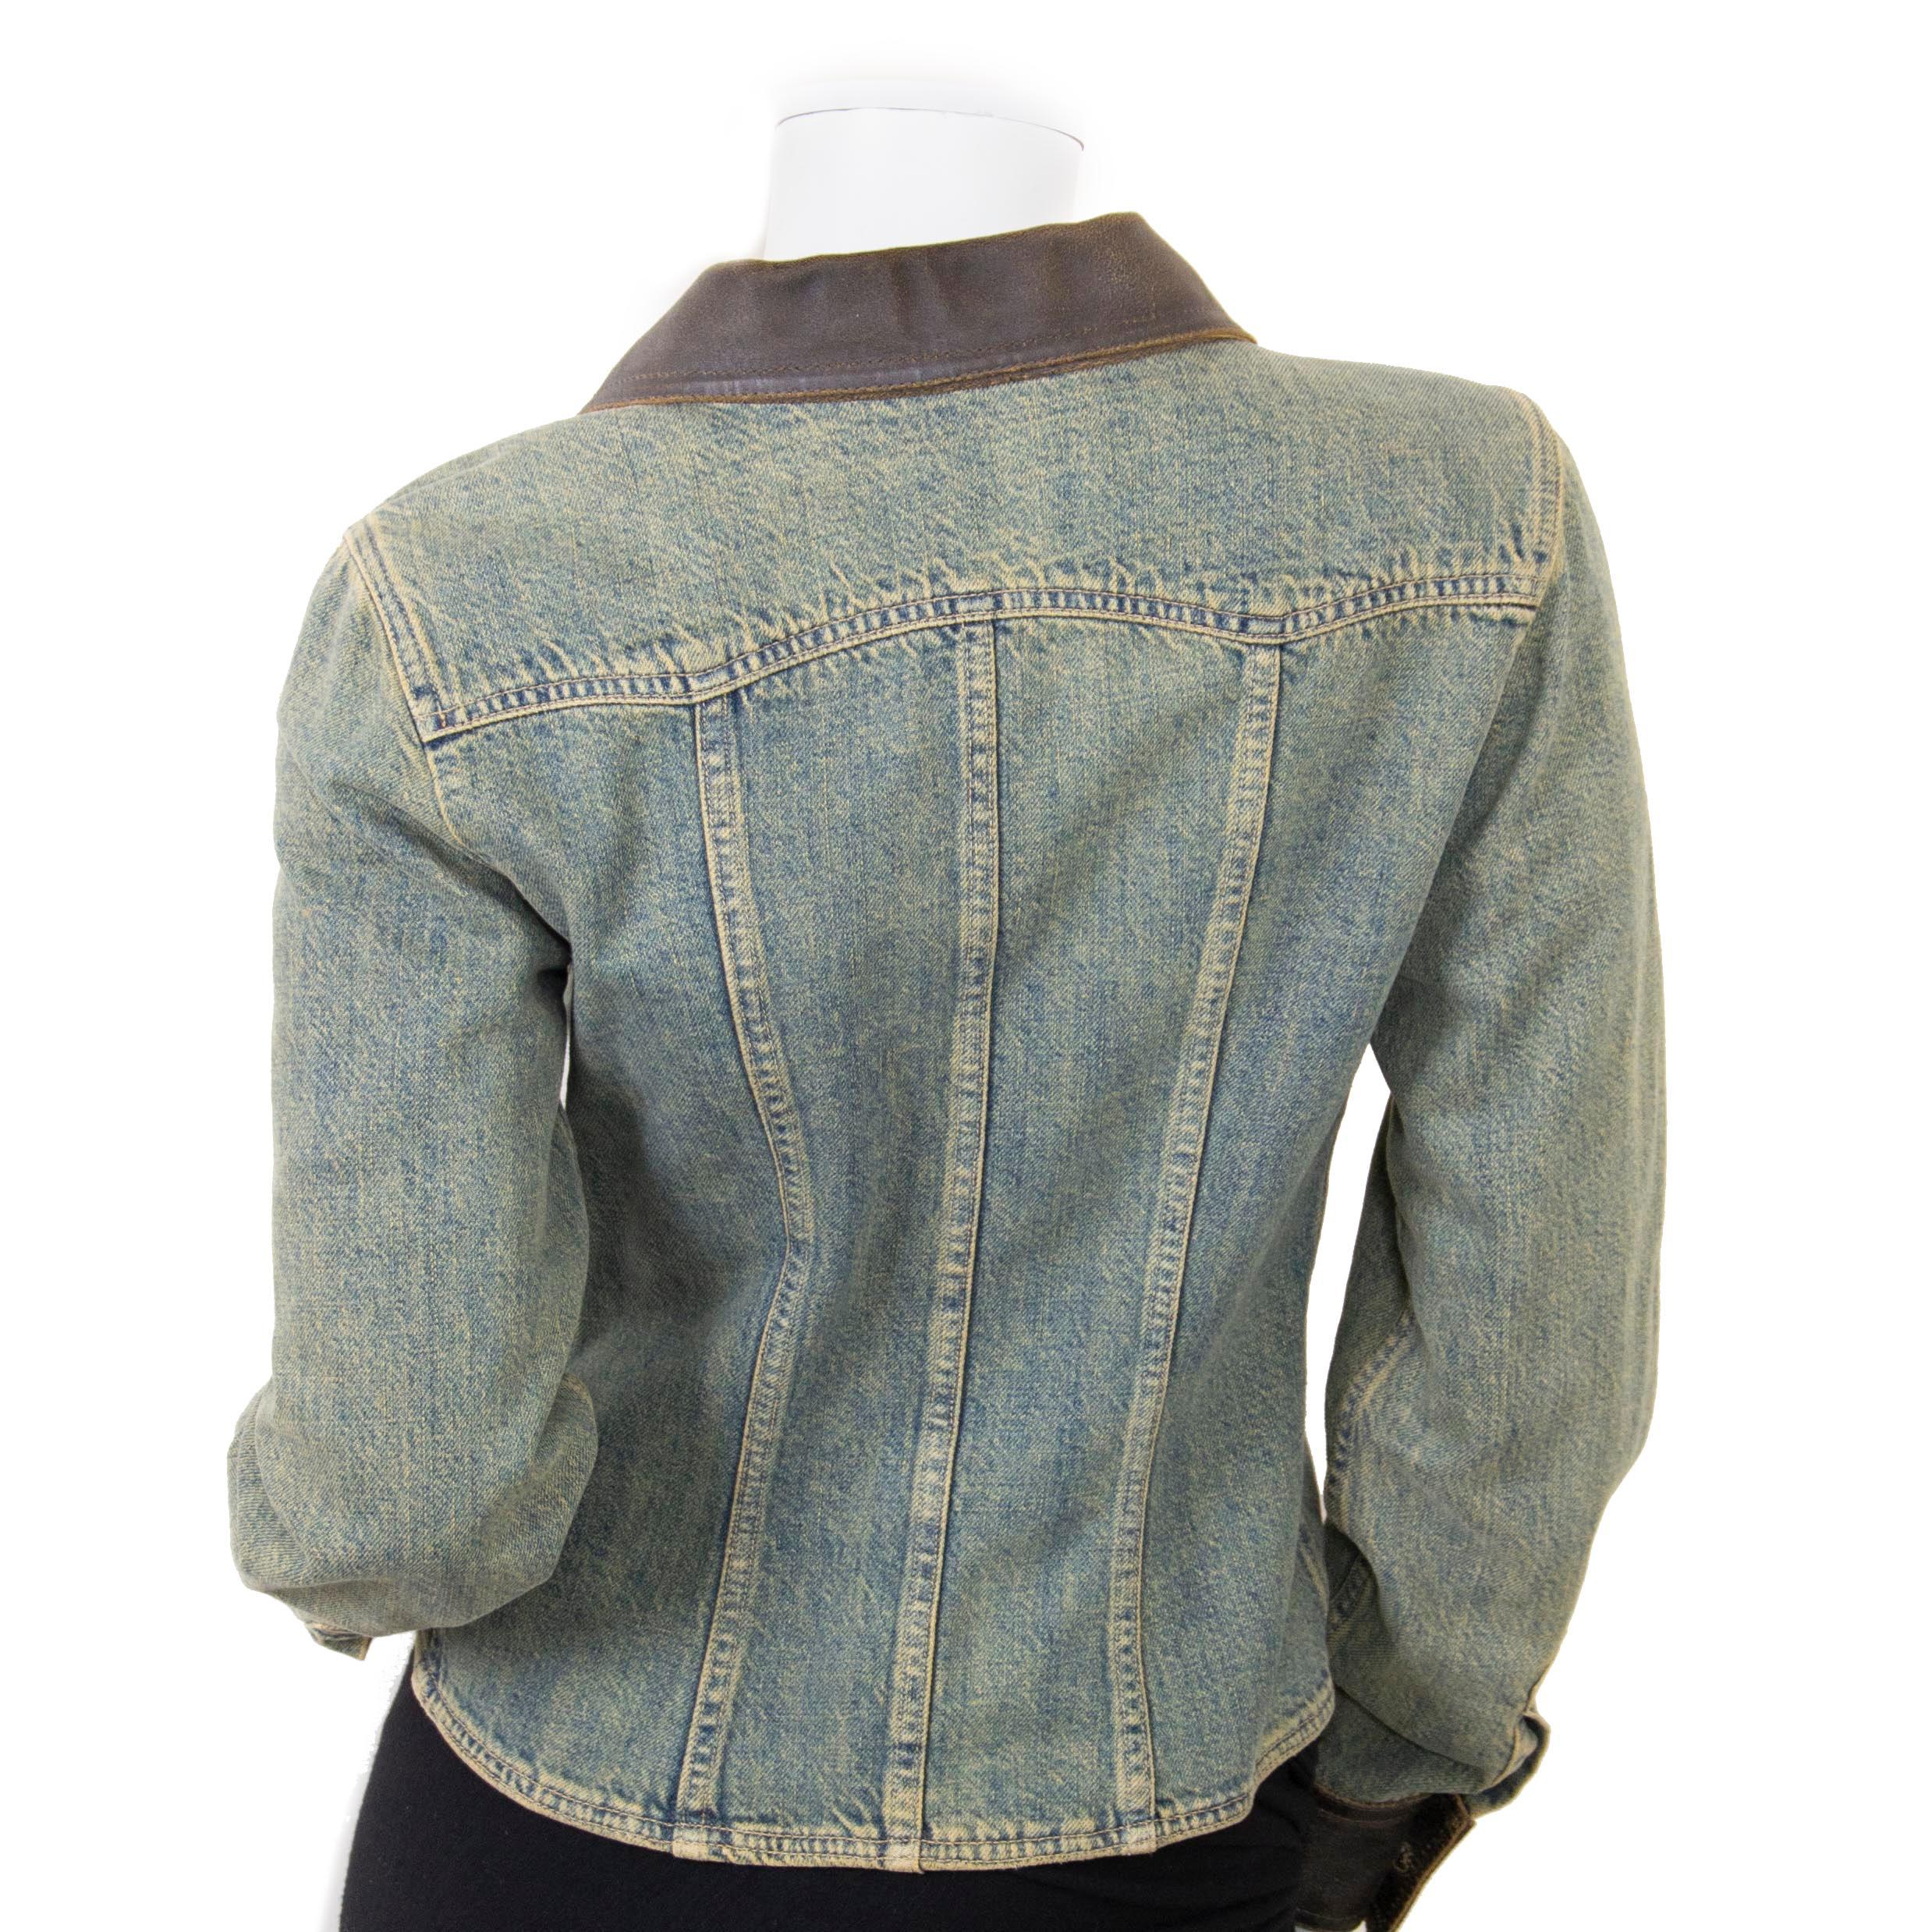 Stunning Chanel Denim Jacket with Leather Collar in a French size 38. This piece was part of the 2000 A/W collection. 
Distressed denim look and aged leather details. 
